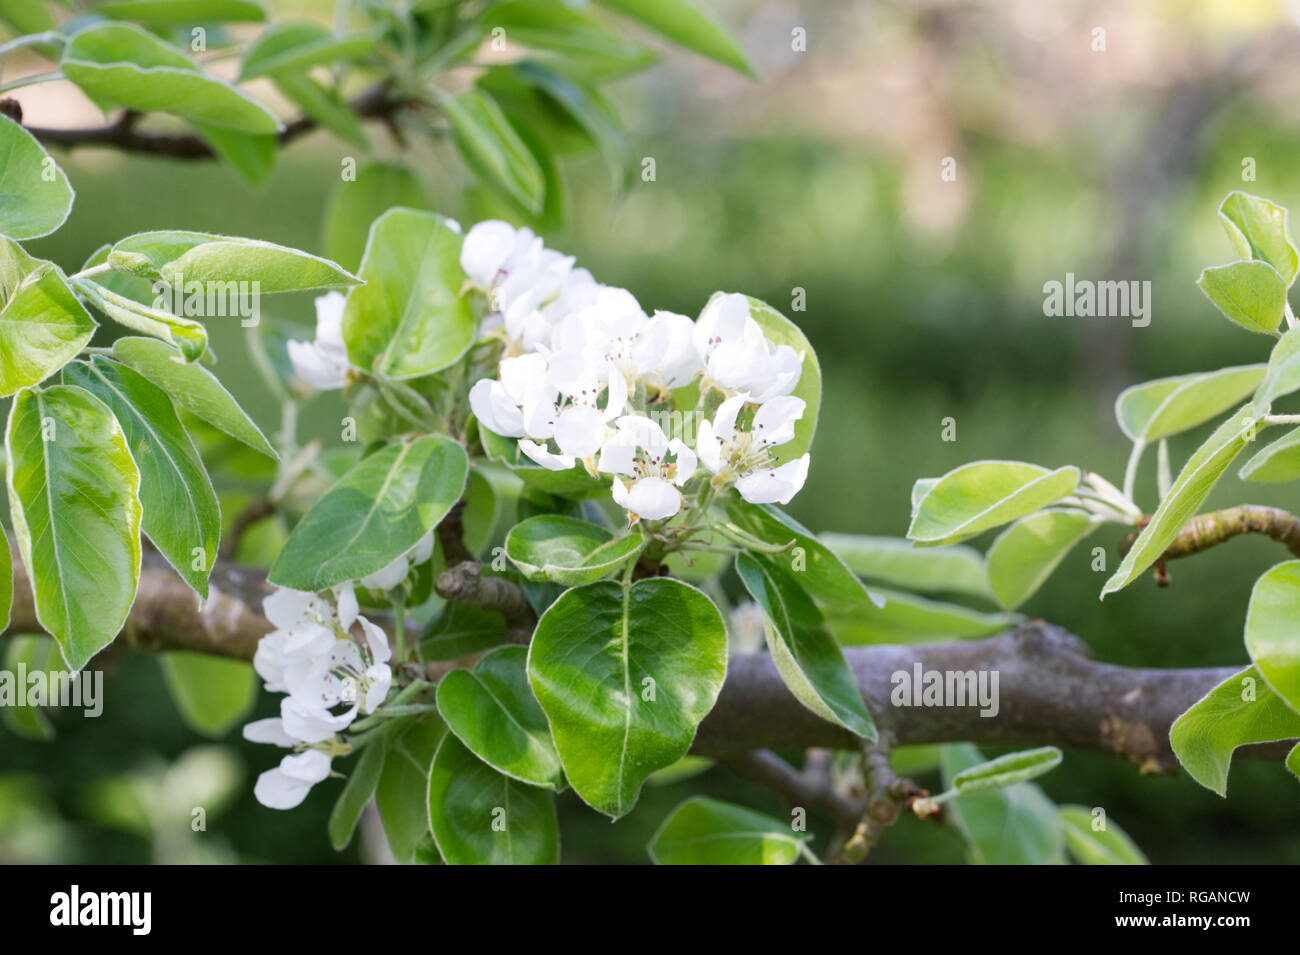 Pyrus communis 'Beurre Hardy' espalier growing in an English orchard. Pear blossom. Stock Photo